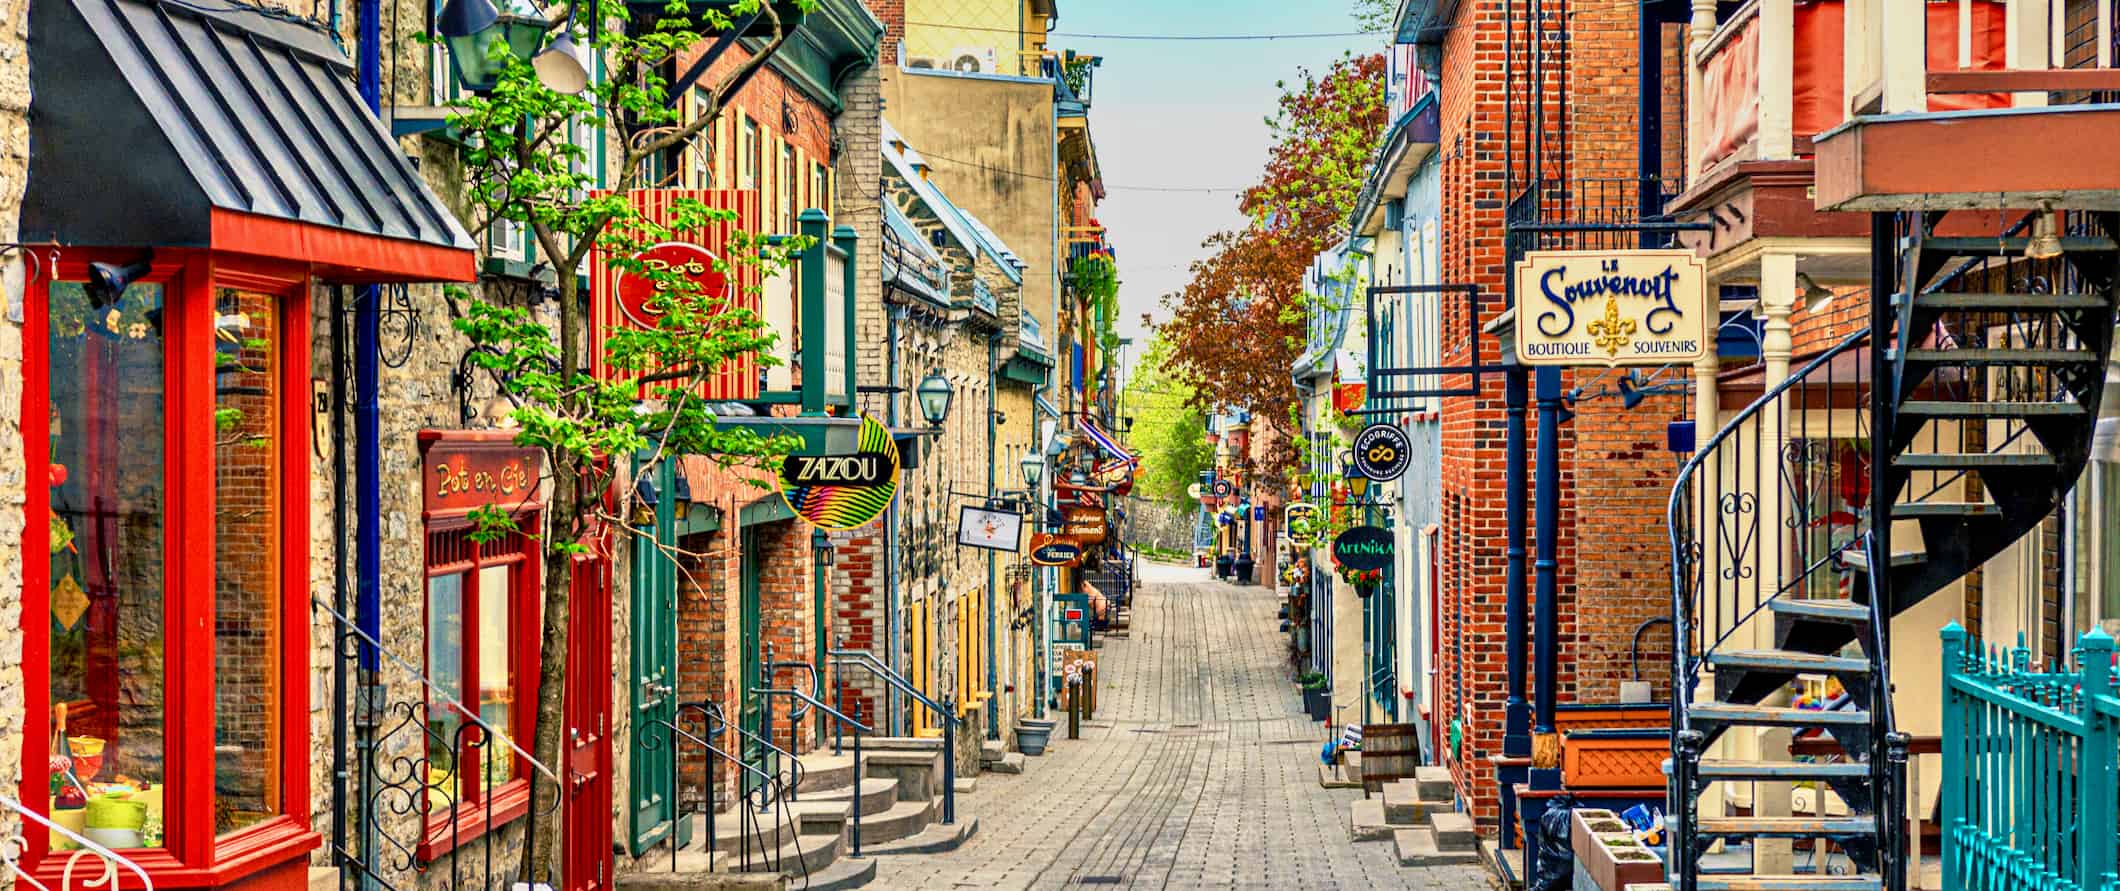 A narrow street lined by old shops in Quebec City, Canada